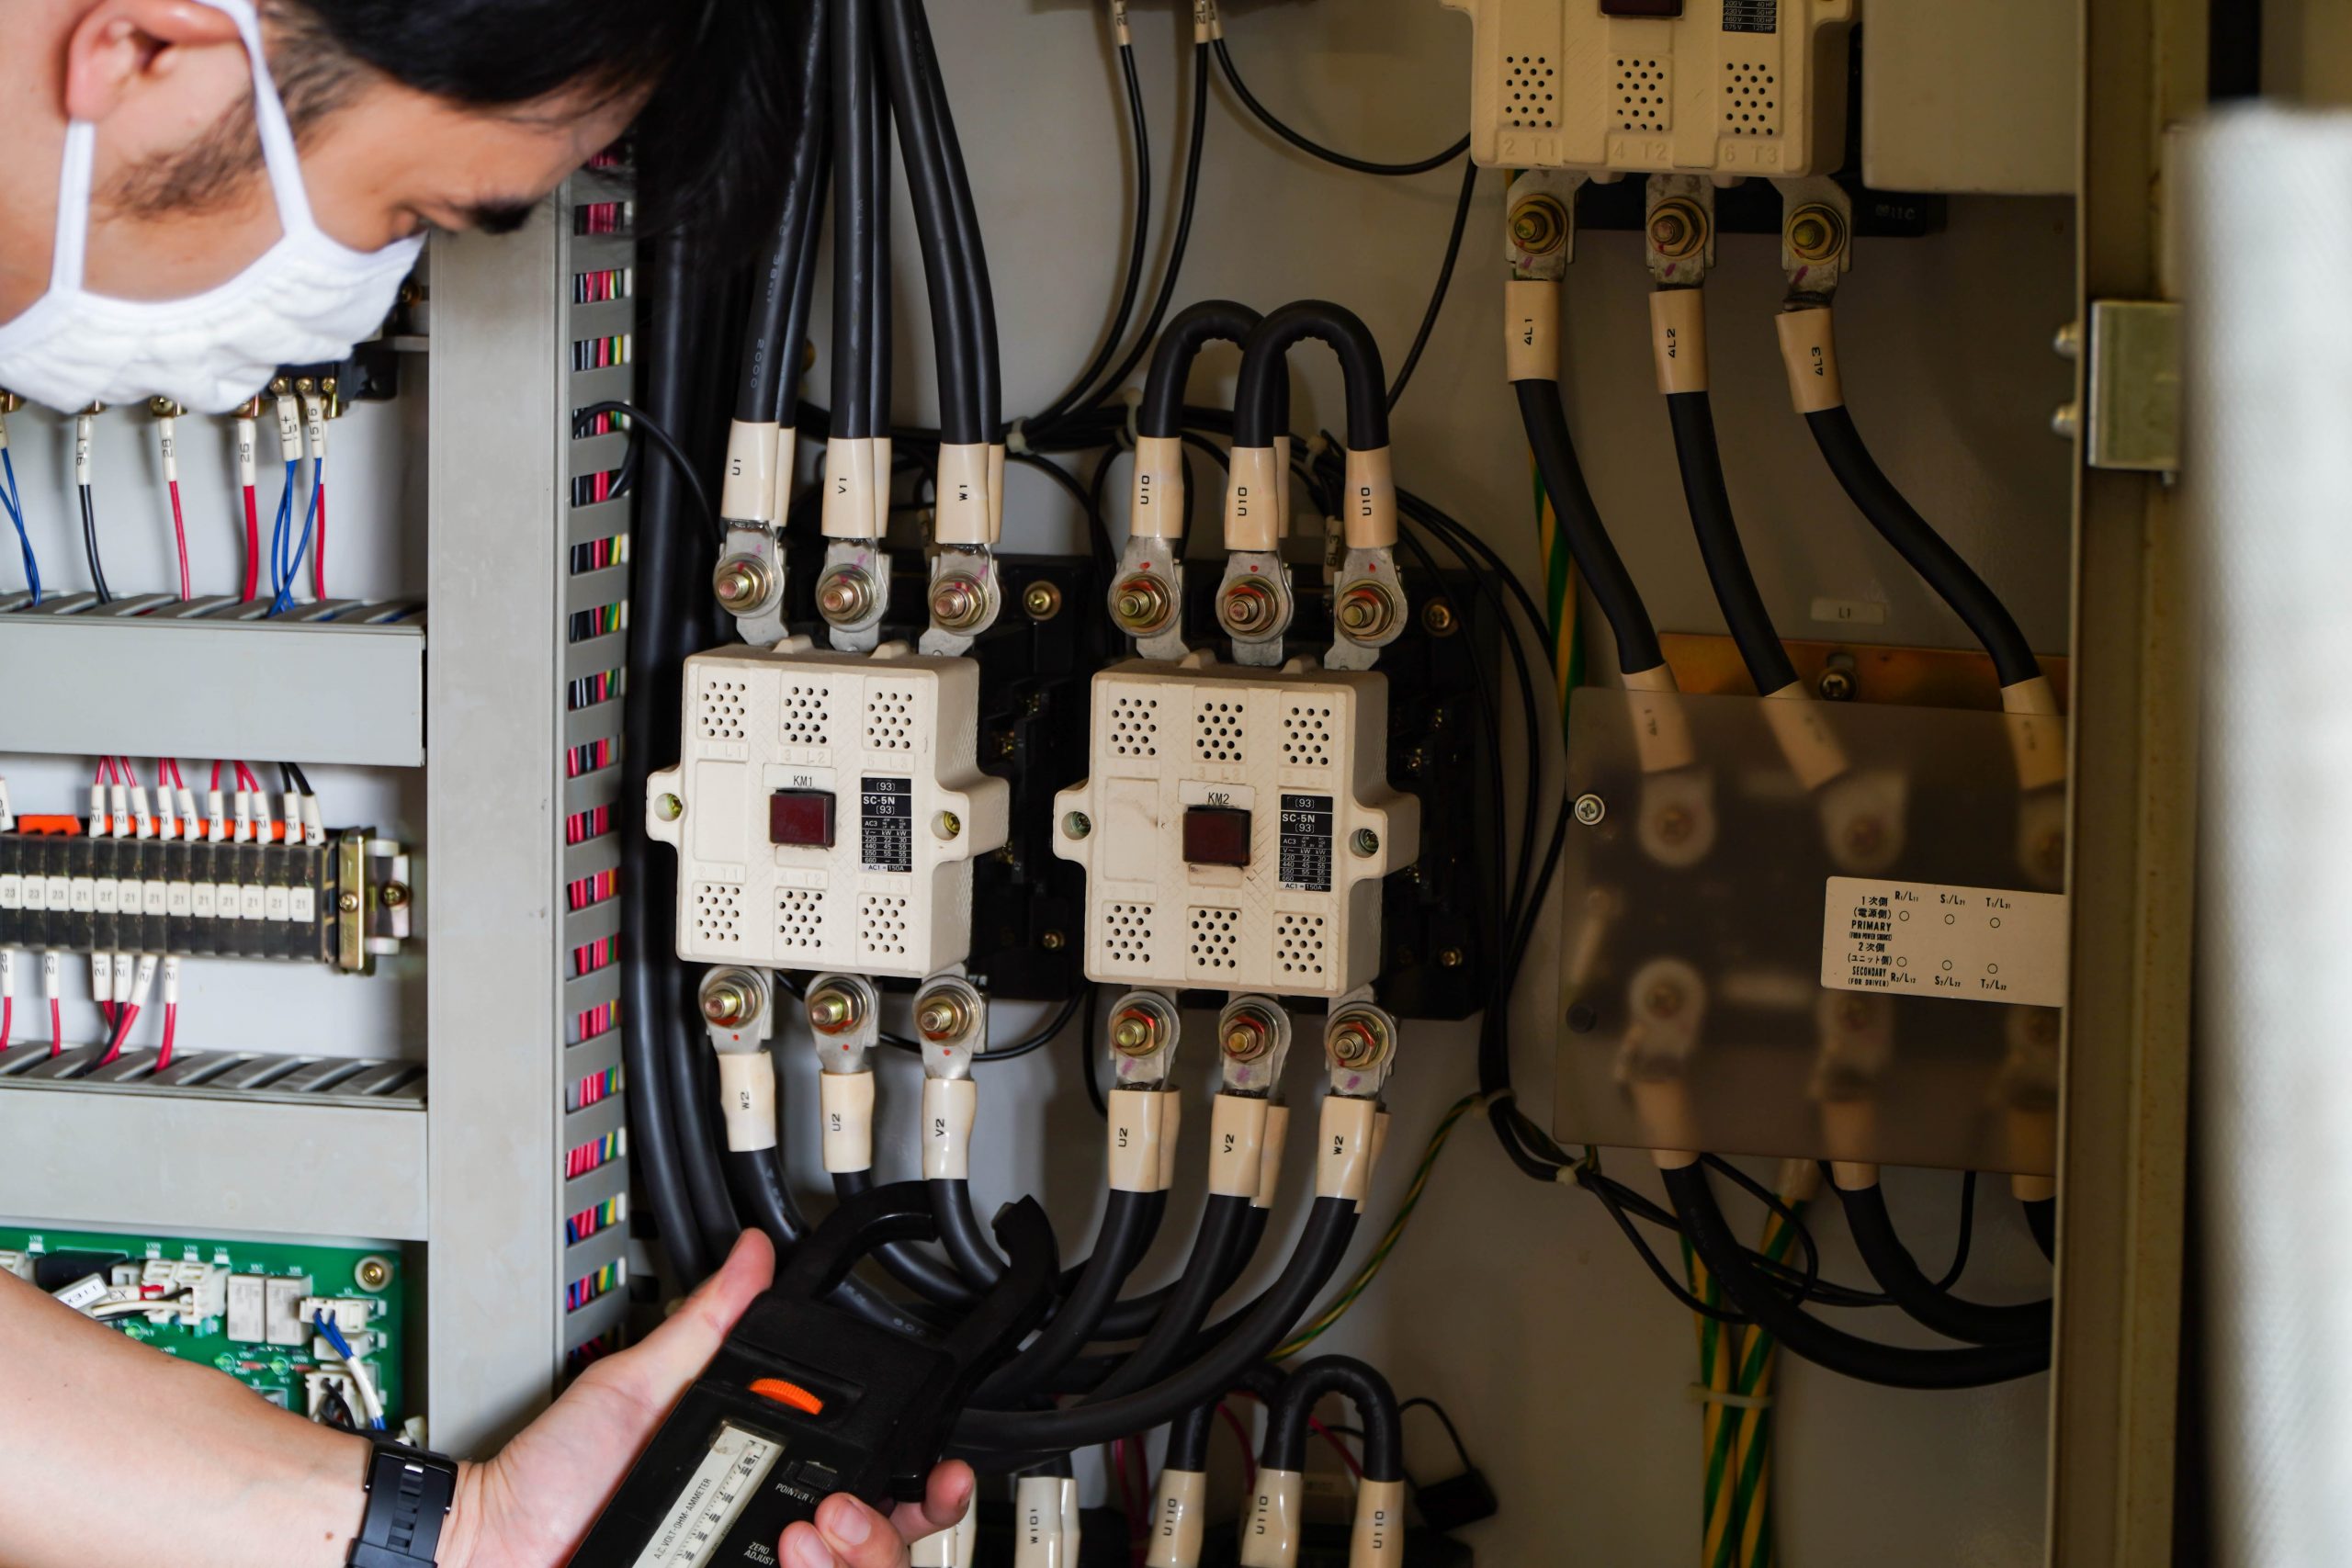 Inspection of Electrical Equipment and Systems